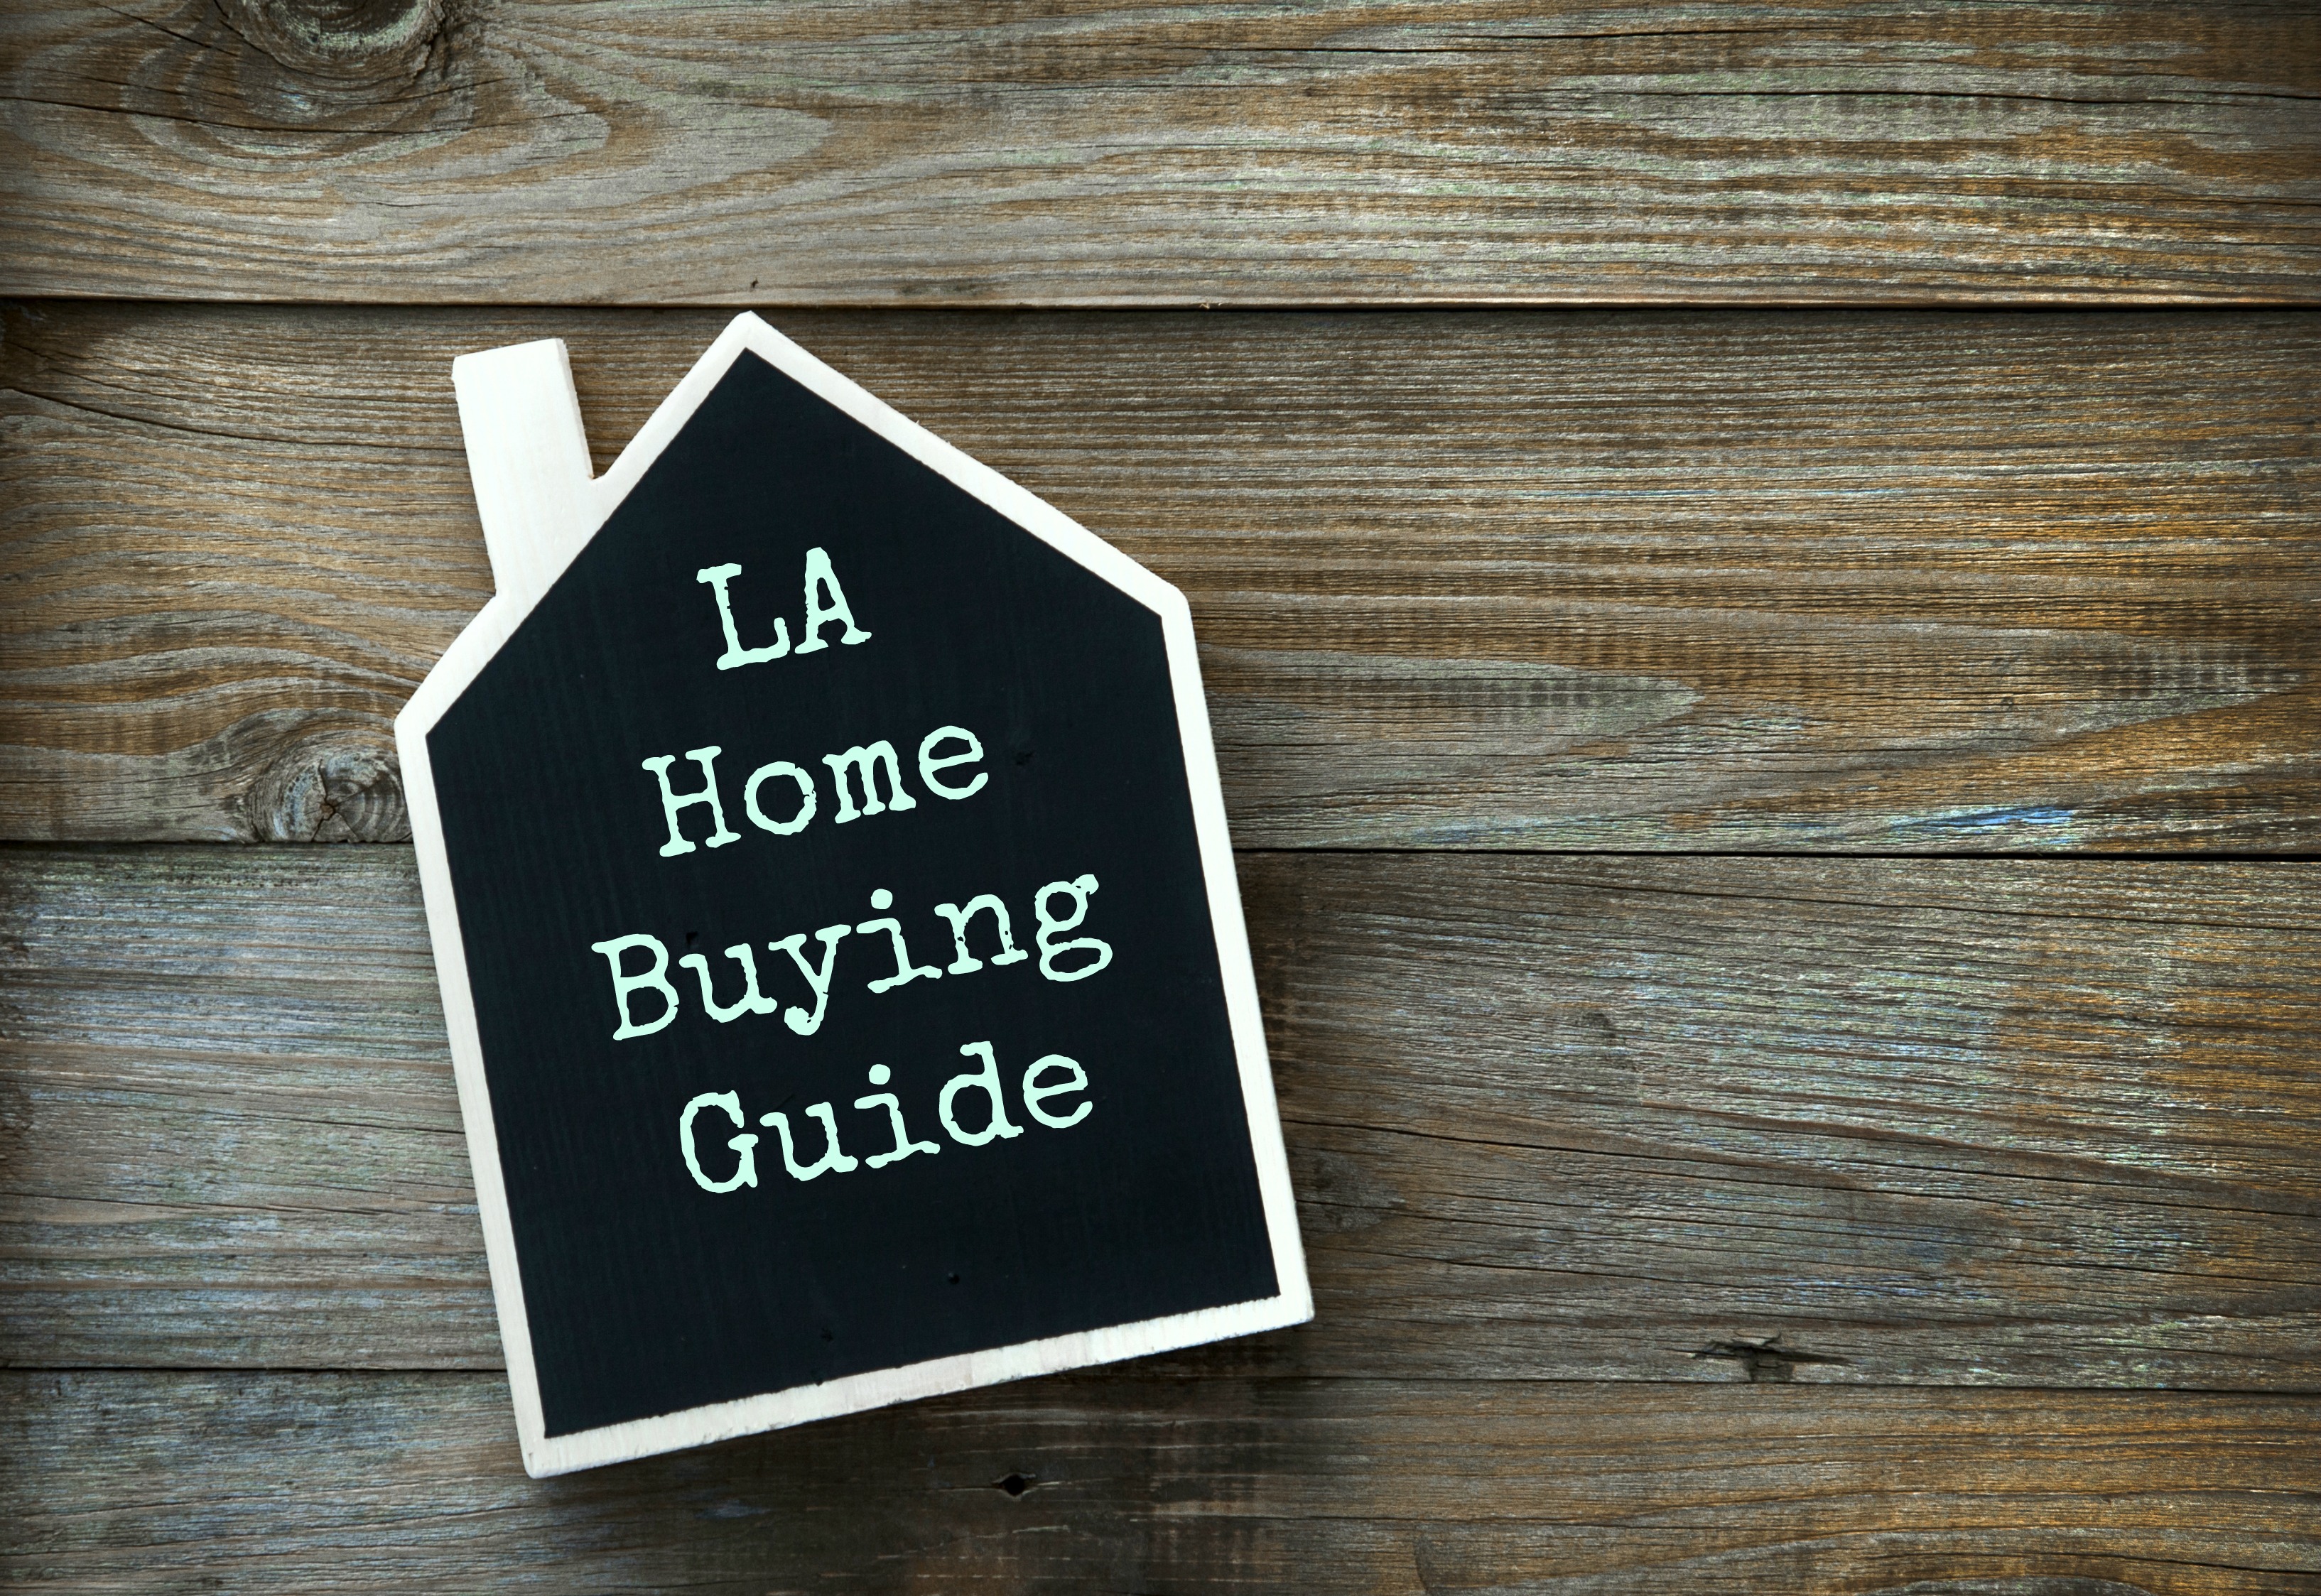 The LA Home Buying Guide